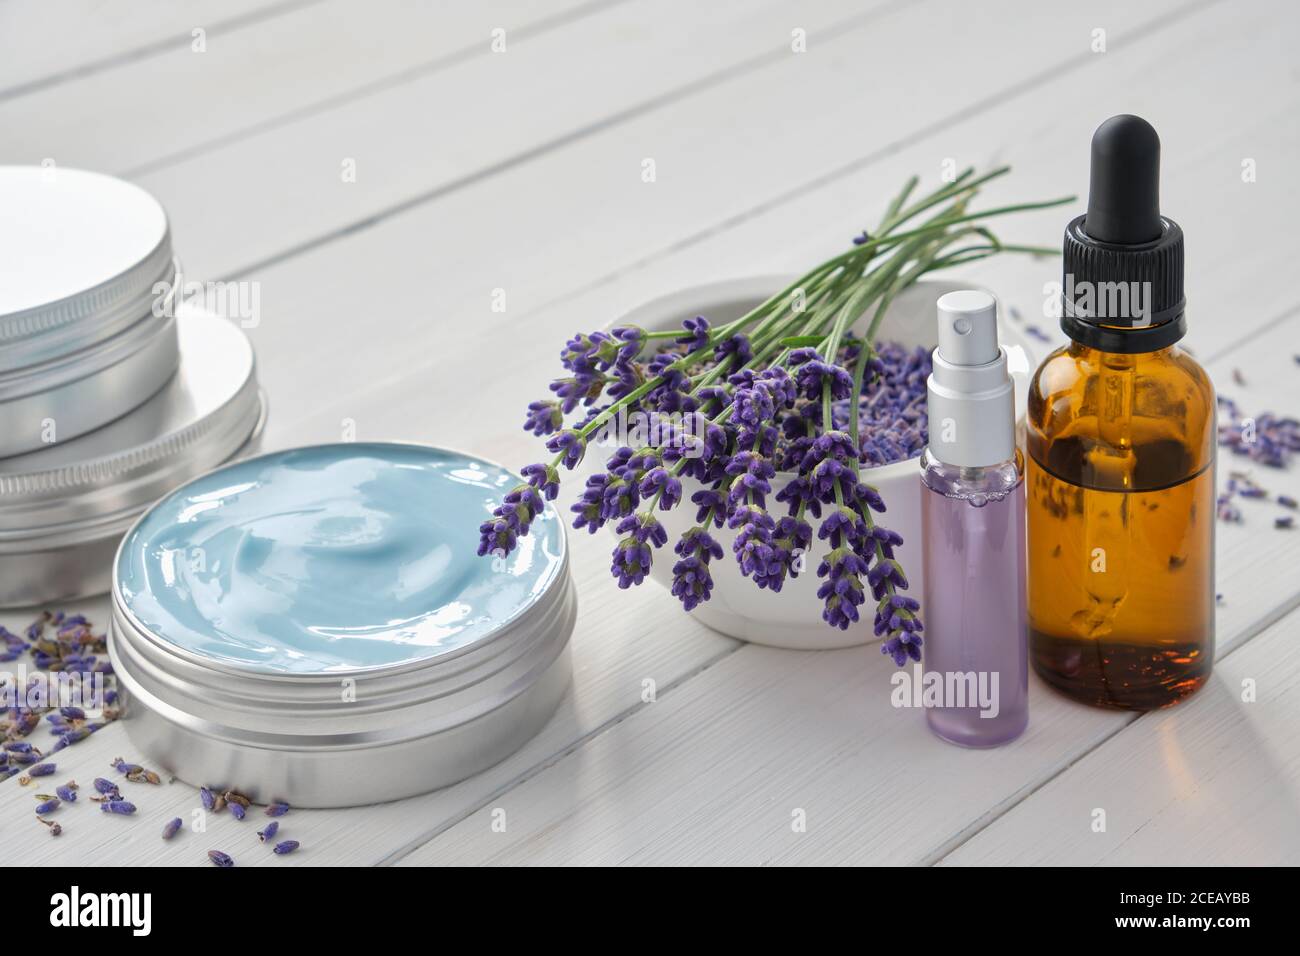 Natural lavender cream, bunch of lavender flowers, dropper bottle of essential lavender oil and perfumed water or hydrolate in a spray bottle. Stock Photo